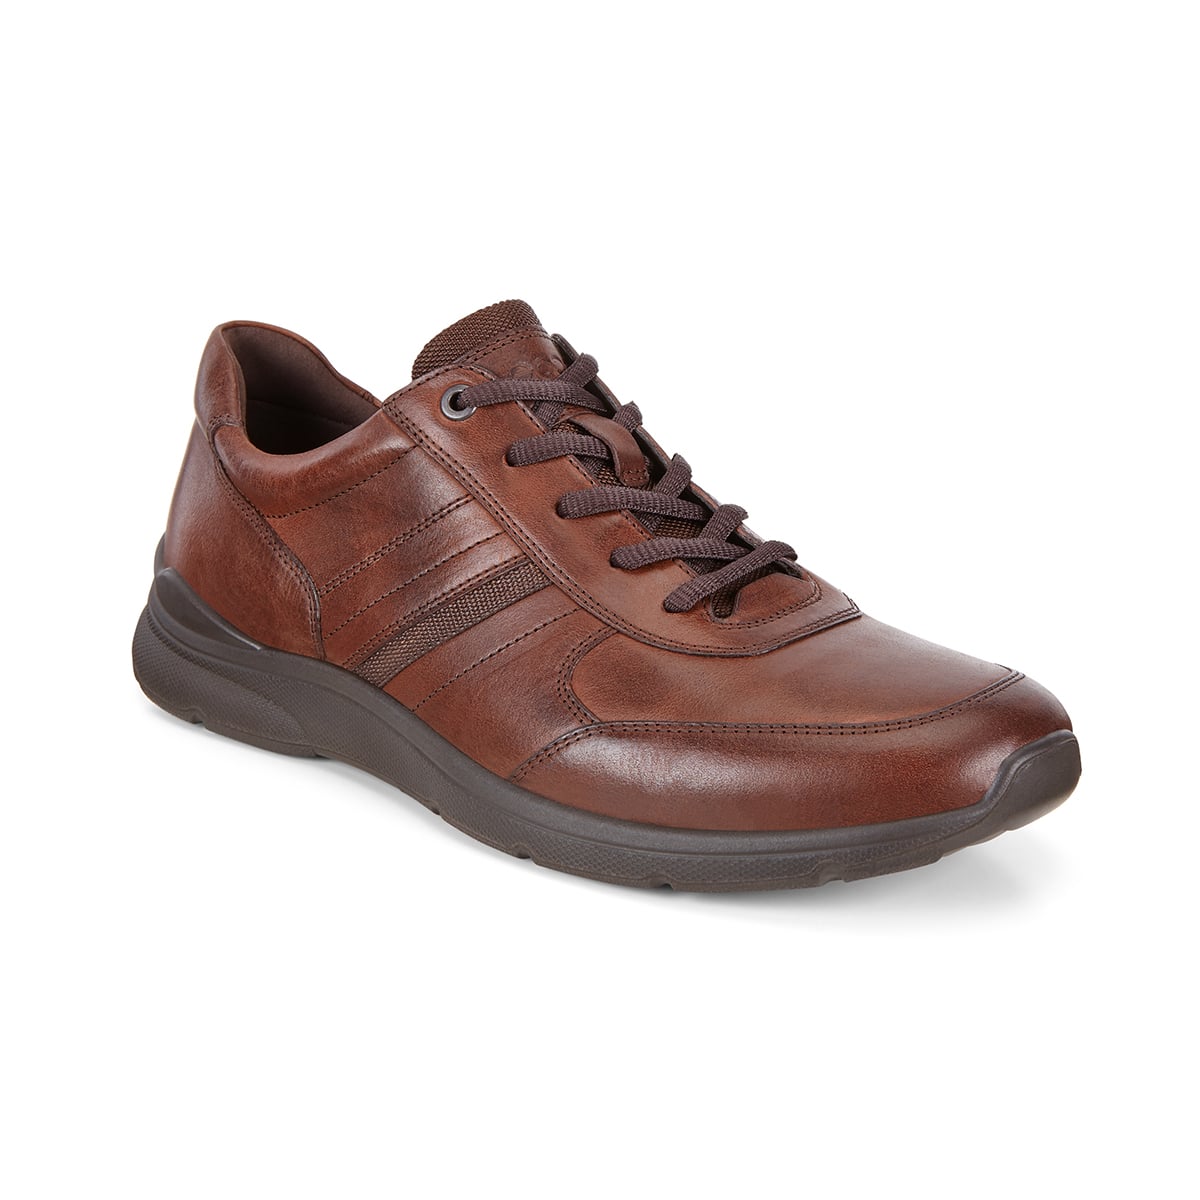 Ecco Irving - 121 Shoes